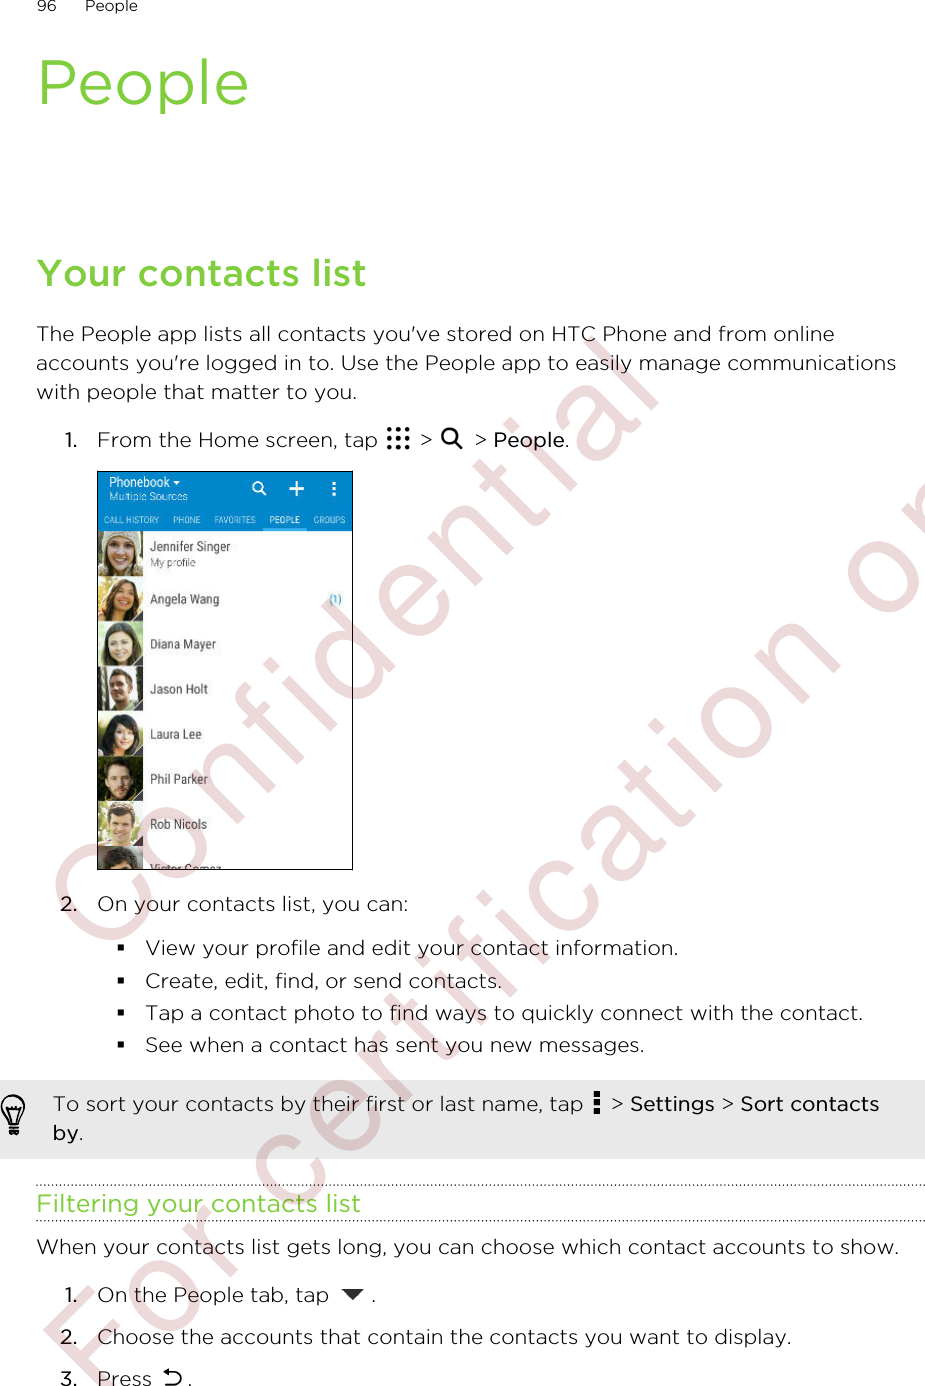 PeopleYour contacts listThe People app lists all contacts you&apos;ve stored on HTC Phone and from onlineaccounts you&apos;re logged in to. Use the People app to easily manage communicationswith people that matter to you.1. From the Home screen, tap   &gt;   &gt; People. 2. On your contacts list, you can:§View your profile and edit your contact information.§Create, edit, find, or send contacts.§Tap a contact photo to find ways to quickly connect with the contact.§See when a contact has sent you new messages.To sort your contacts by their first or last name, tap   &gt; Settings &gt; Sort contactsby.Filtering your contacts listWhen your contacts list gets long, you can choose which contact accounts to show.1. On the People tab, tap  .2. Choose the accounts that contain the contacts you want to display.3. Press  .96 People        Confident ial  For cert ificat ion only